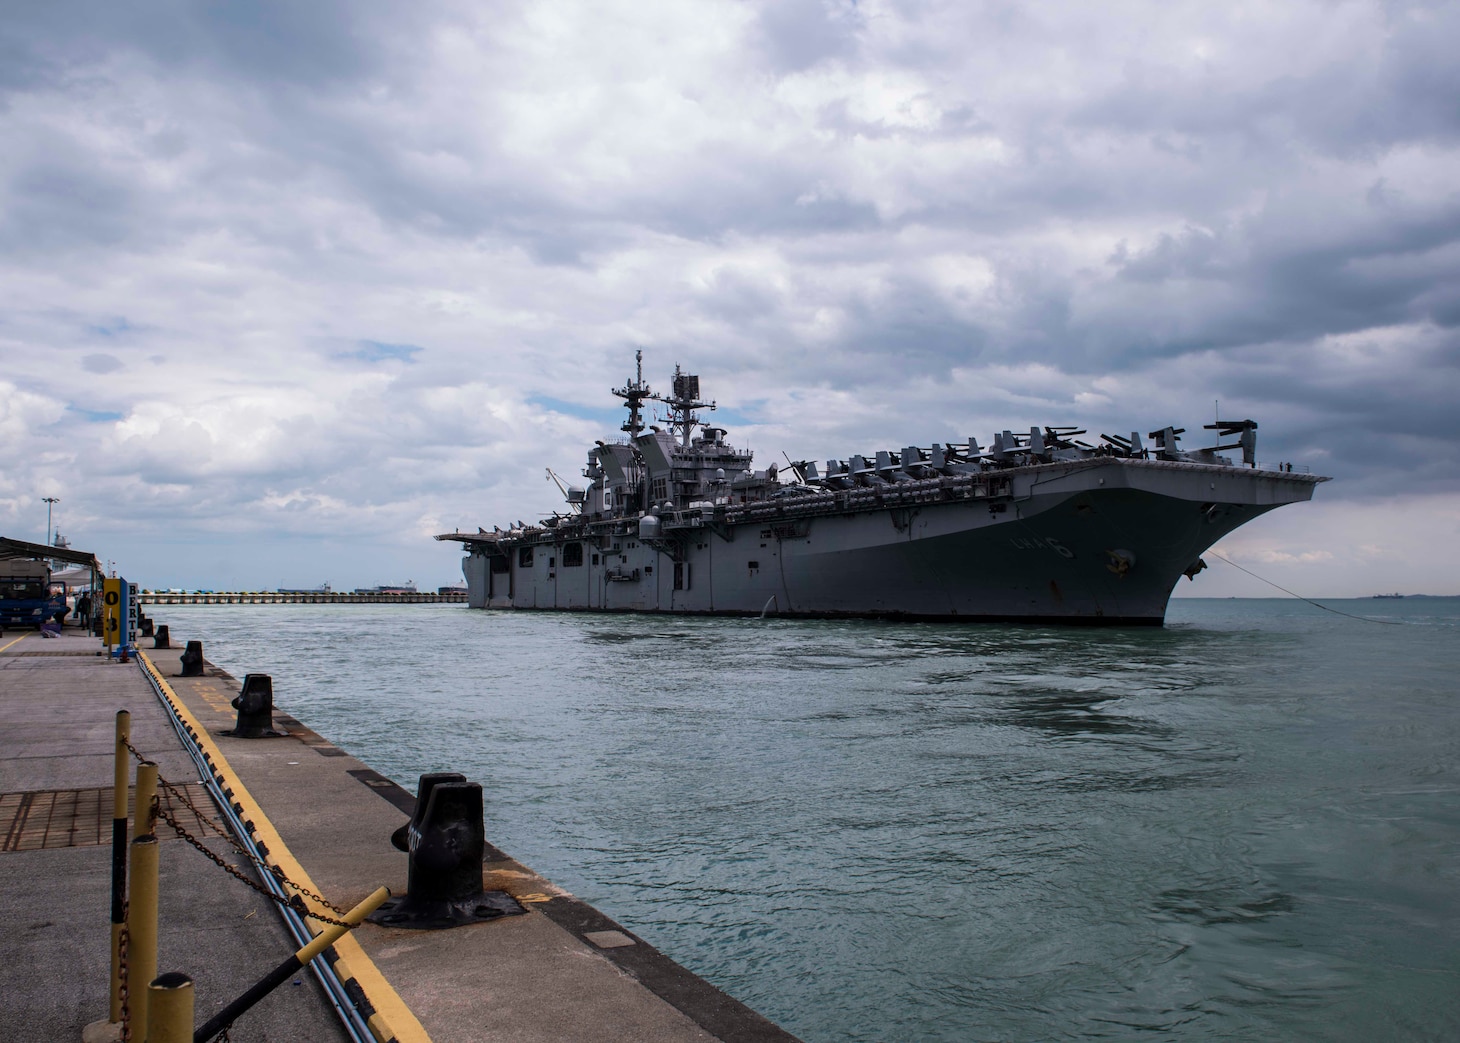 The amphibious assault ship USS America (LHA 6) pulls in to RSS Singapura - Changi Naval Base, Singapore during a regularly scheduled port visit Dec. 22. America, part of the America Amphibious Ready Group, with embarked 15th Marine Expeditionary Unit, is operating in the Indo-Asia Pacific region to strengthen partnerships and serve as a ready-response force for any type of contingency